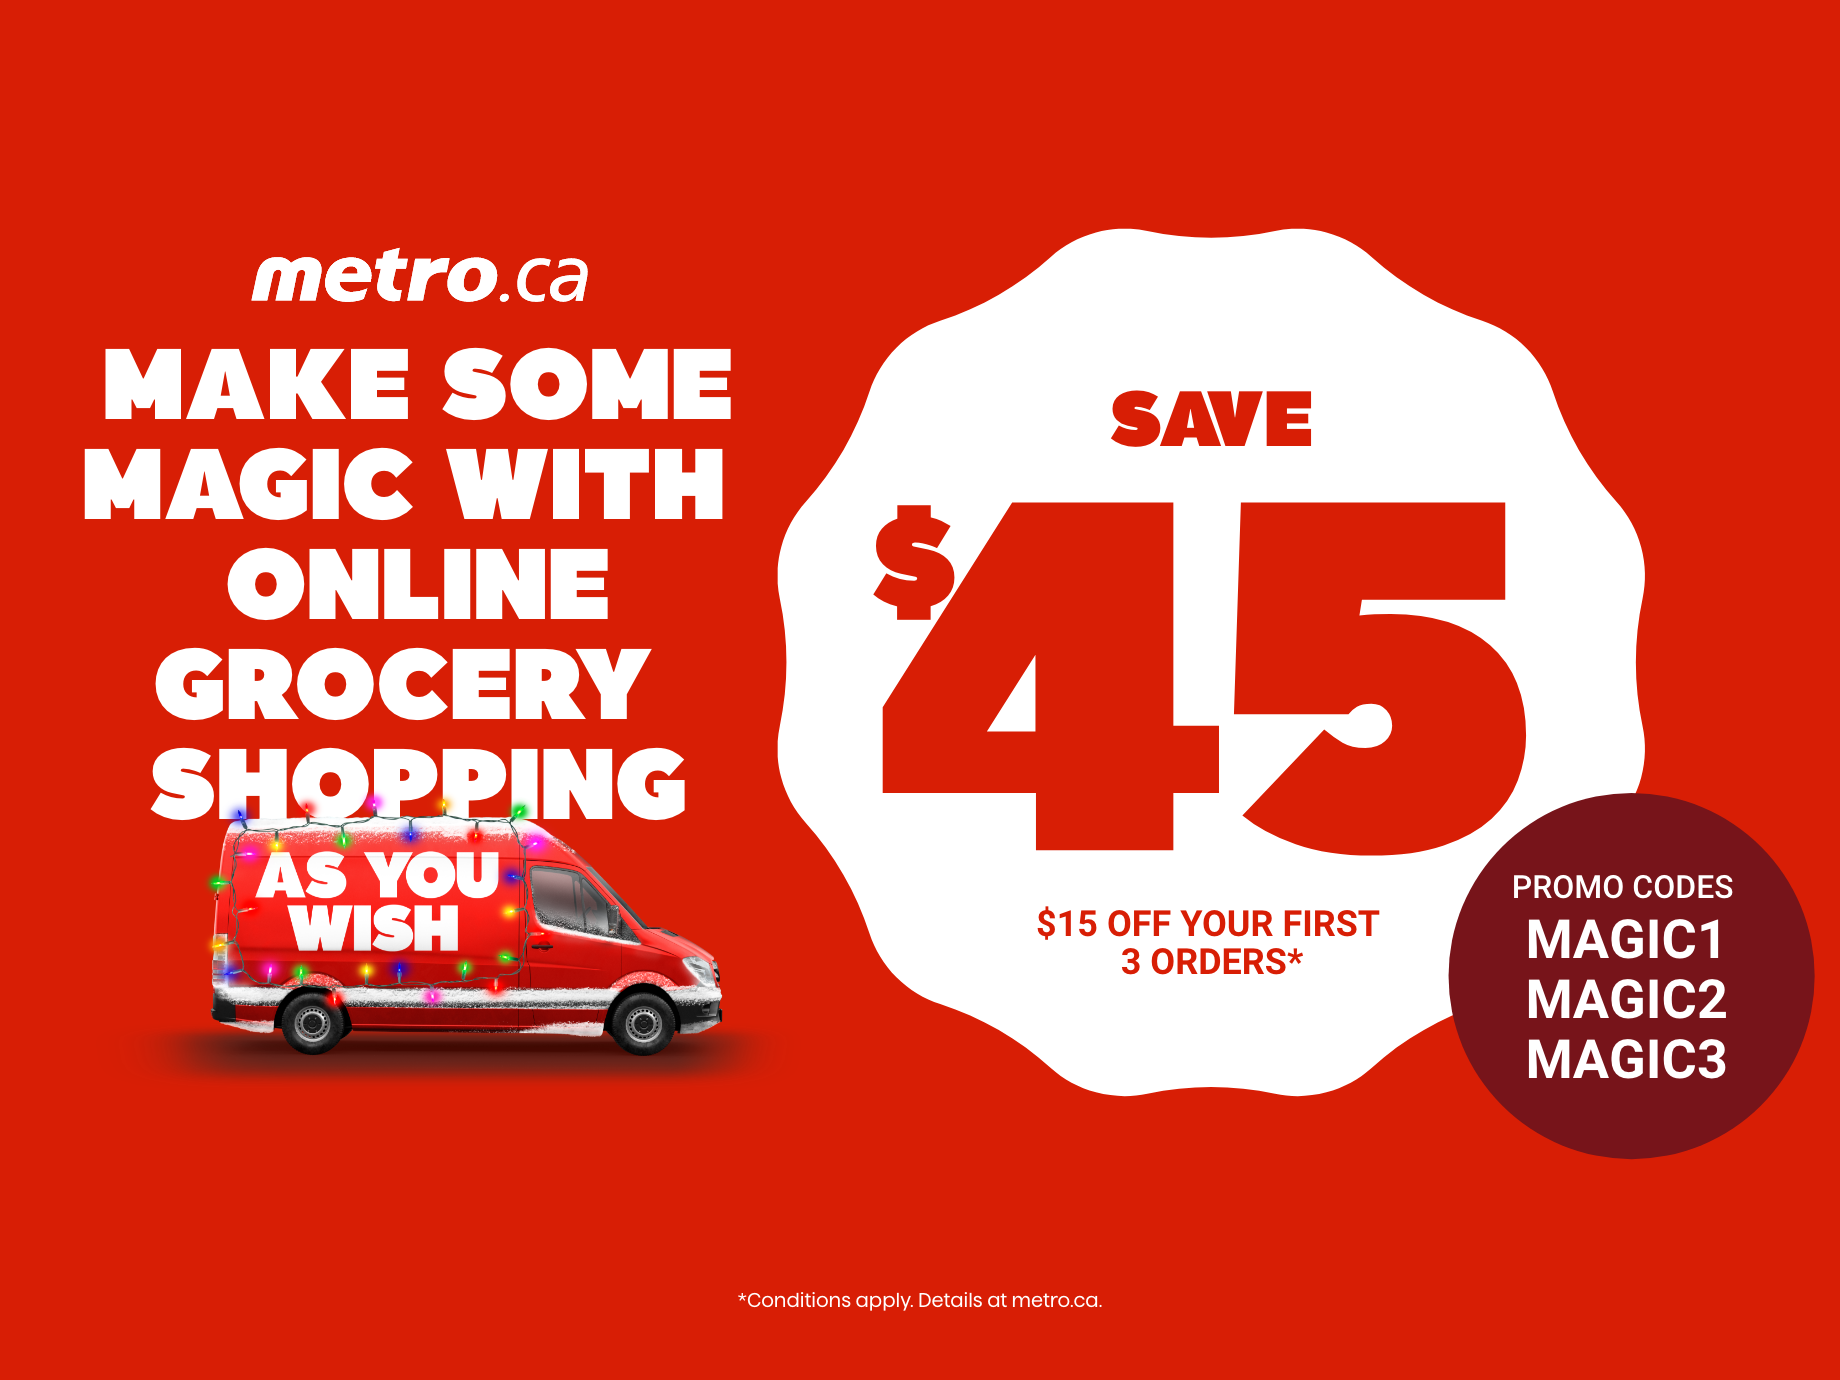 Save up to $45* on metro.ca!